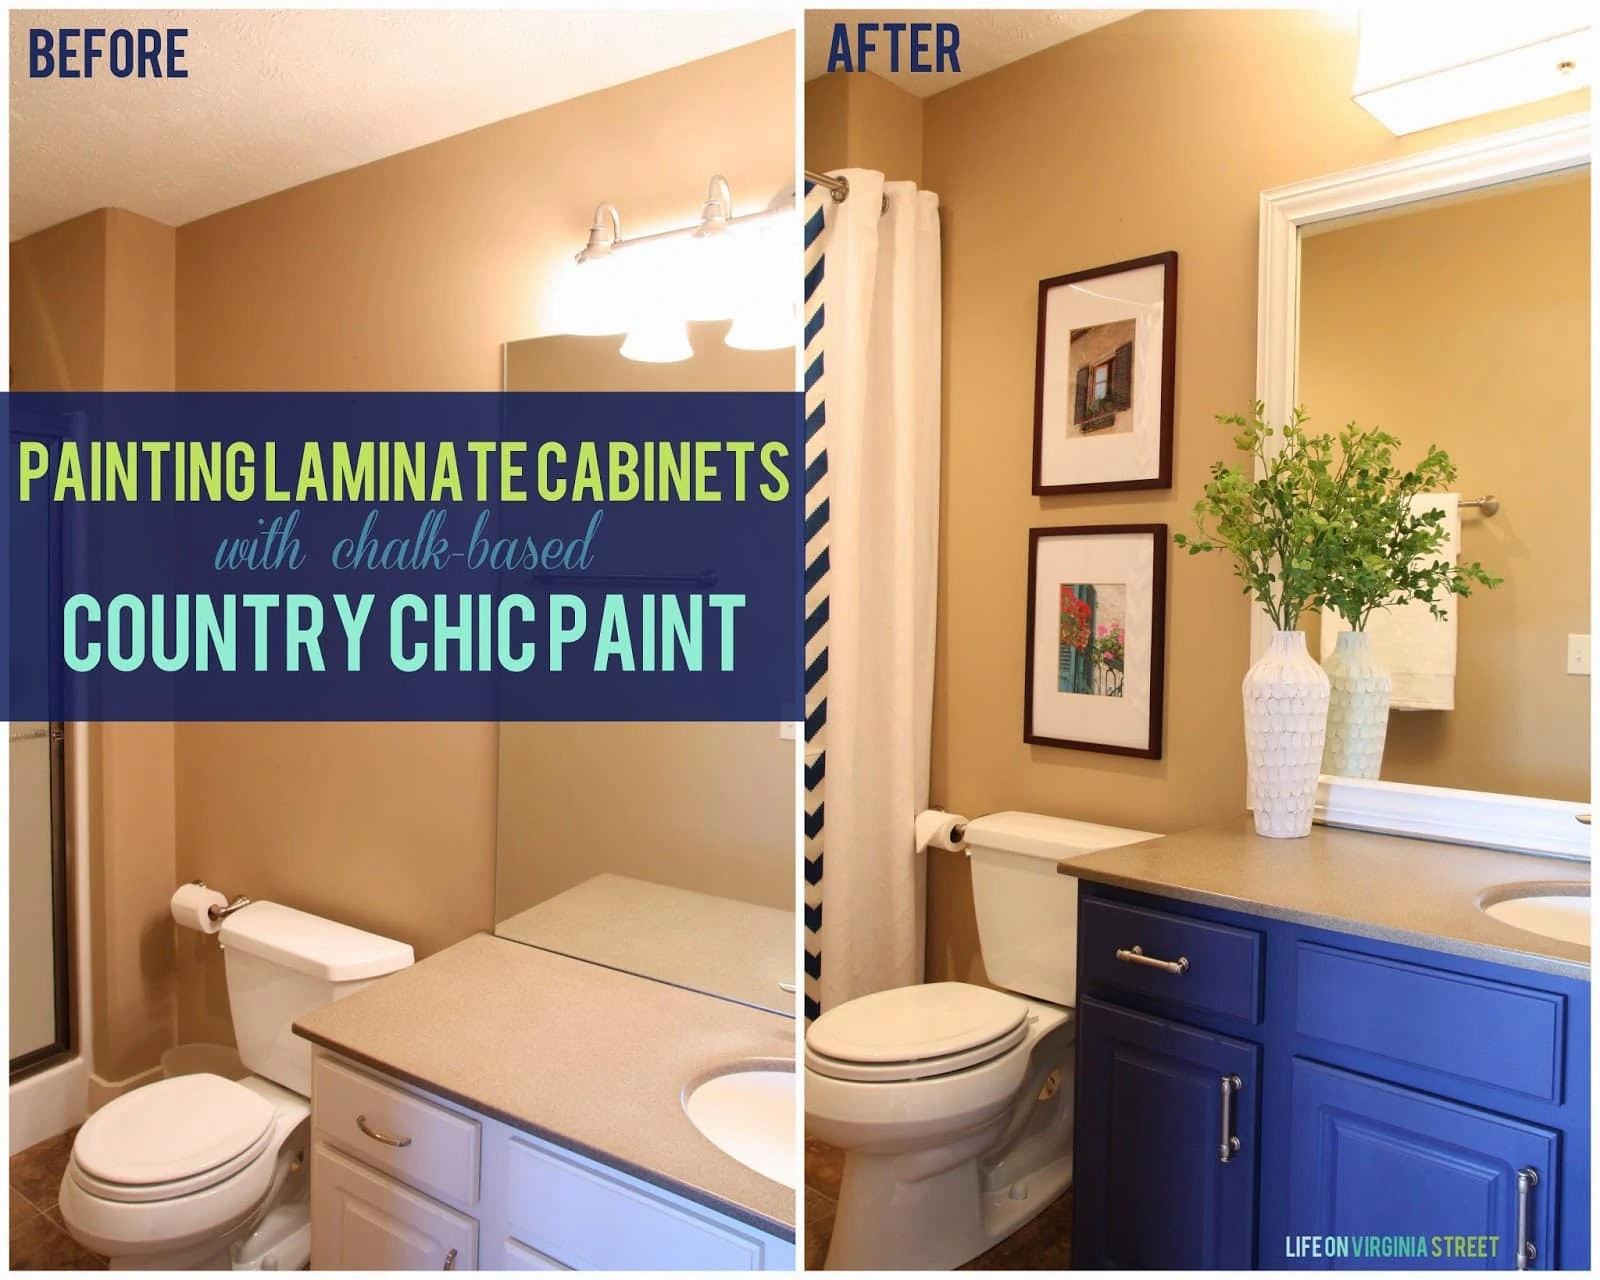 Painted laminate cabinets before and after